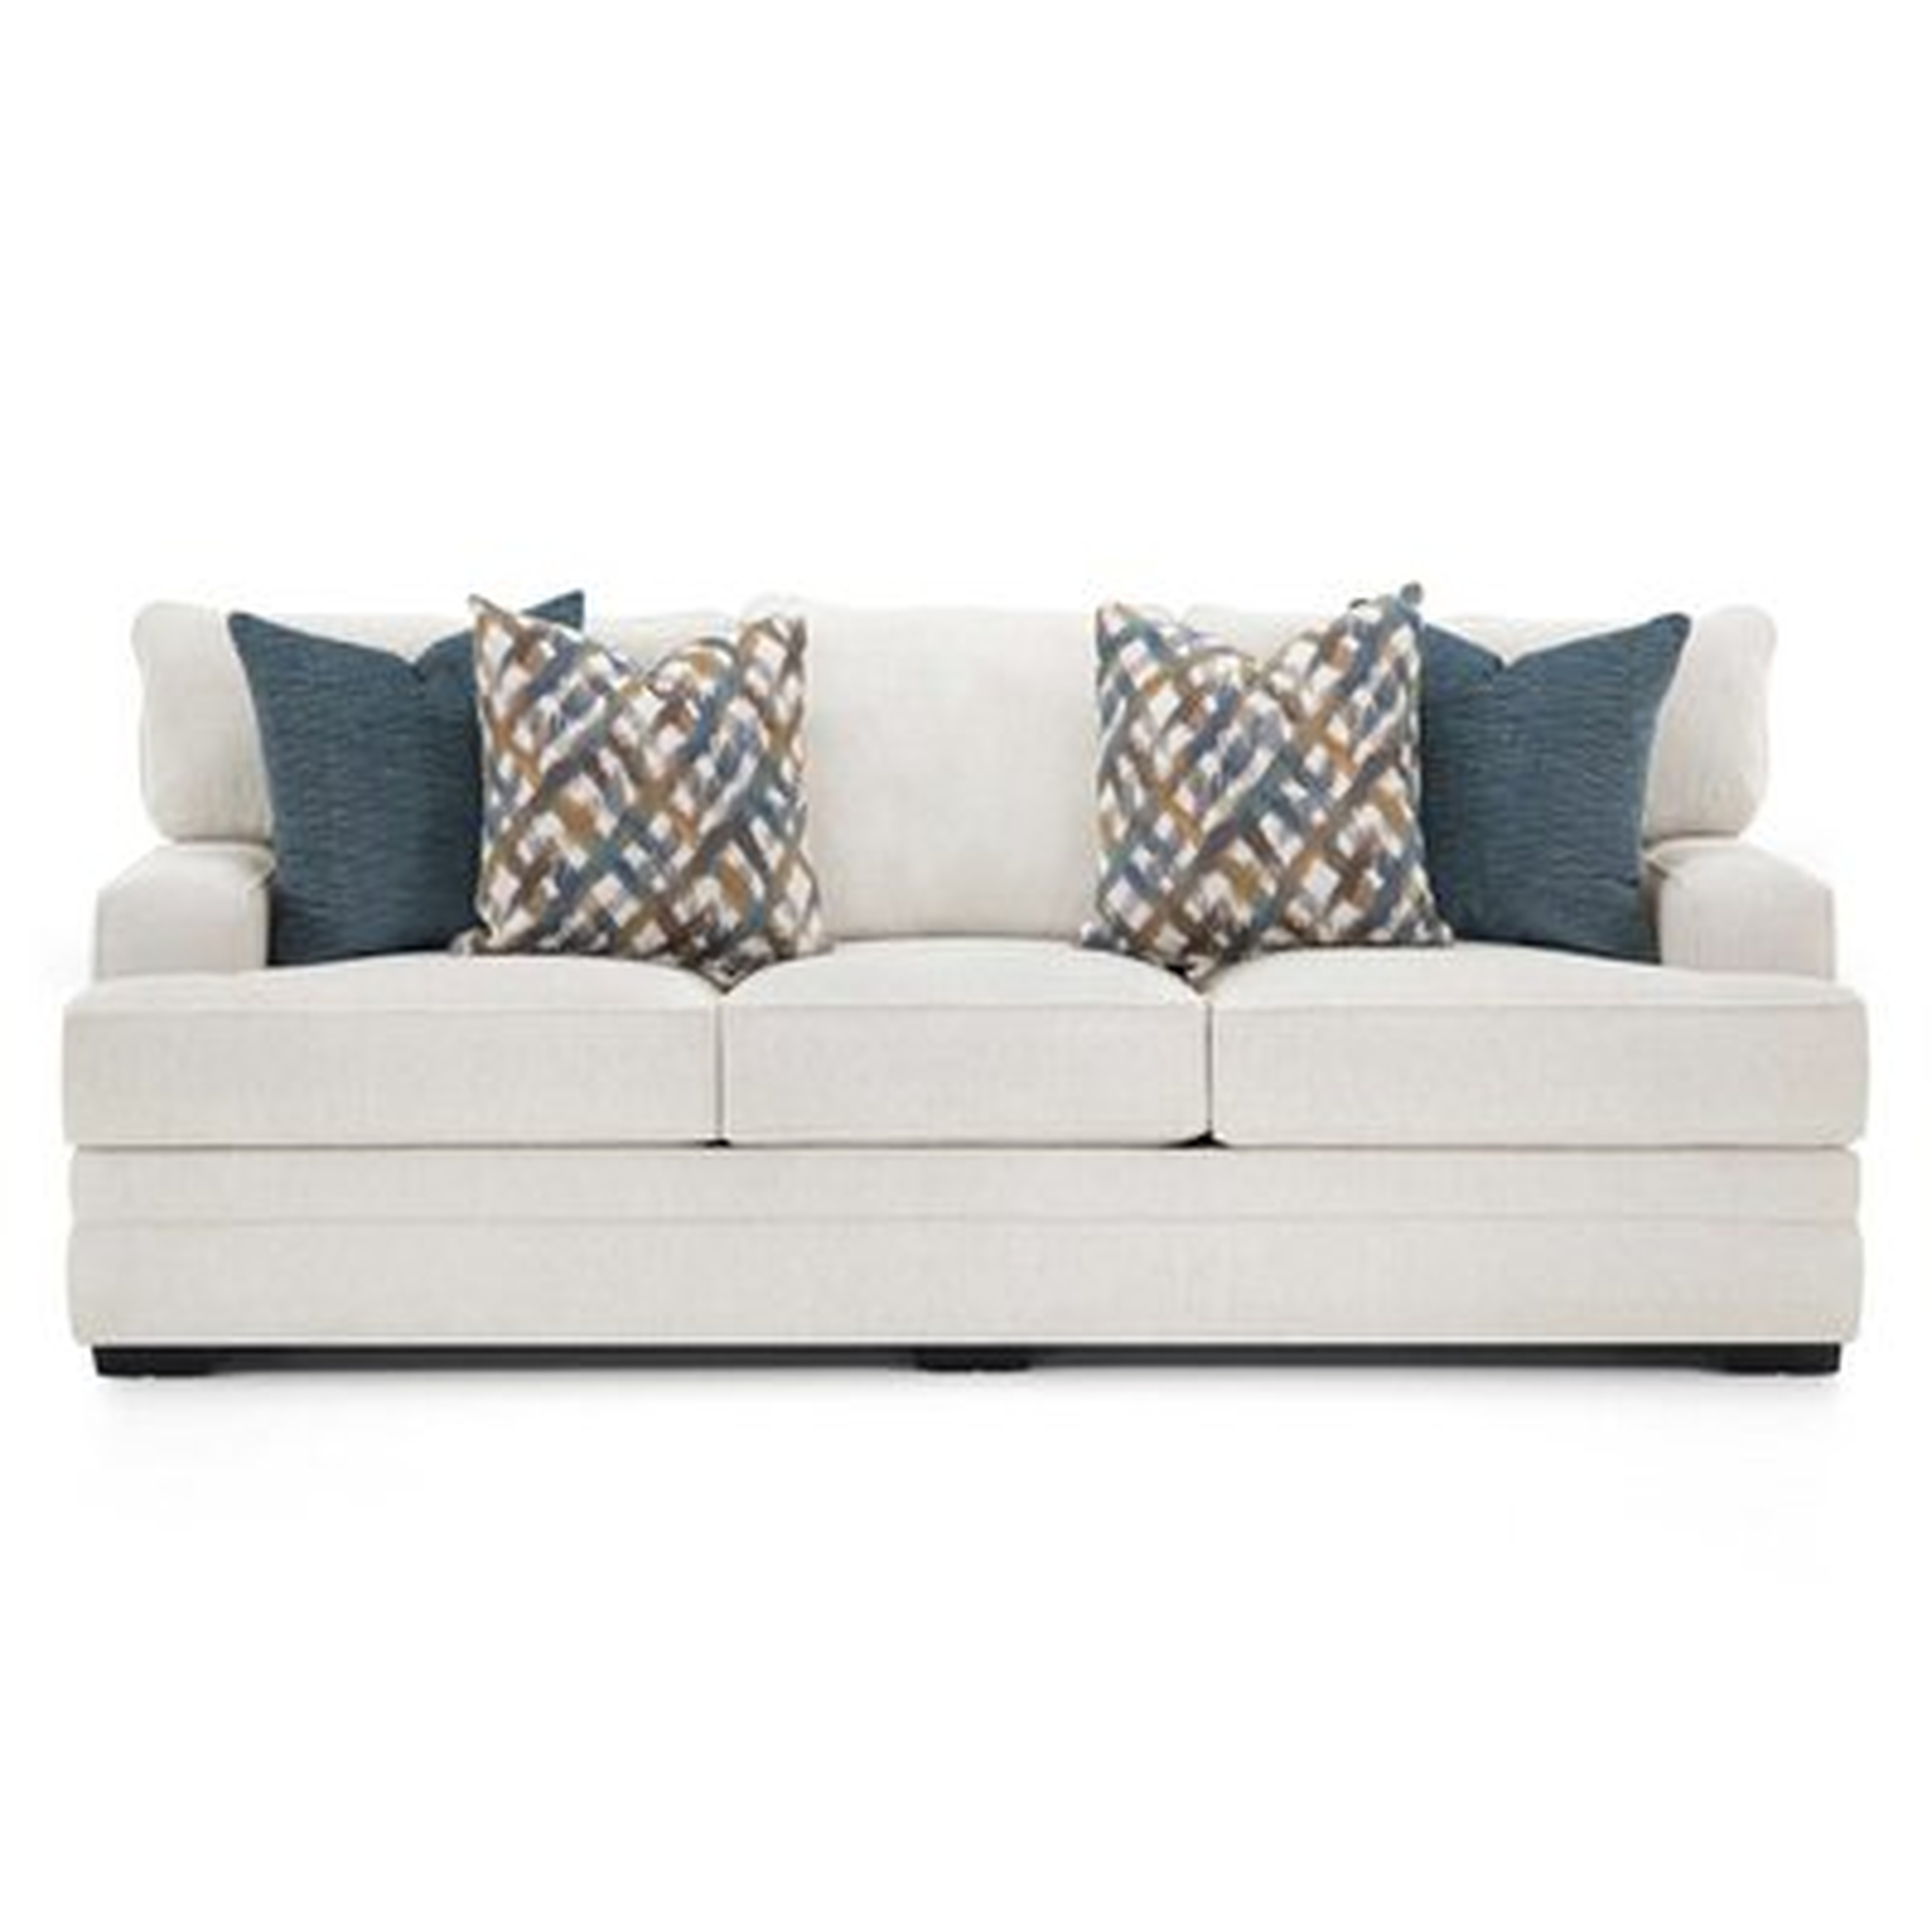 Delp 101.5" Recessed Arm Sofa with Reversible Cushions - Wayfair